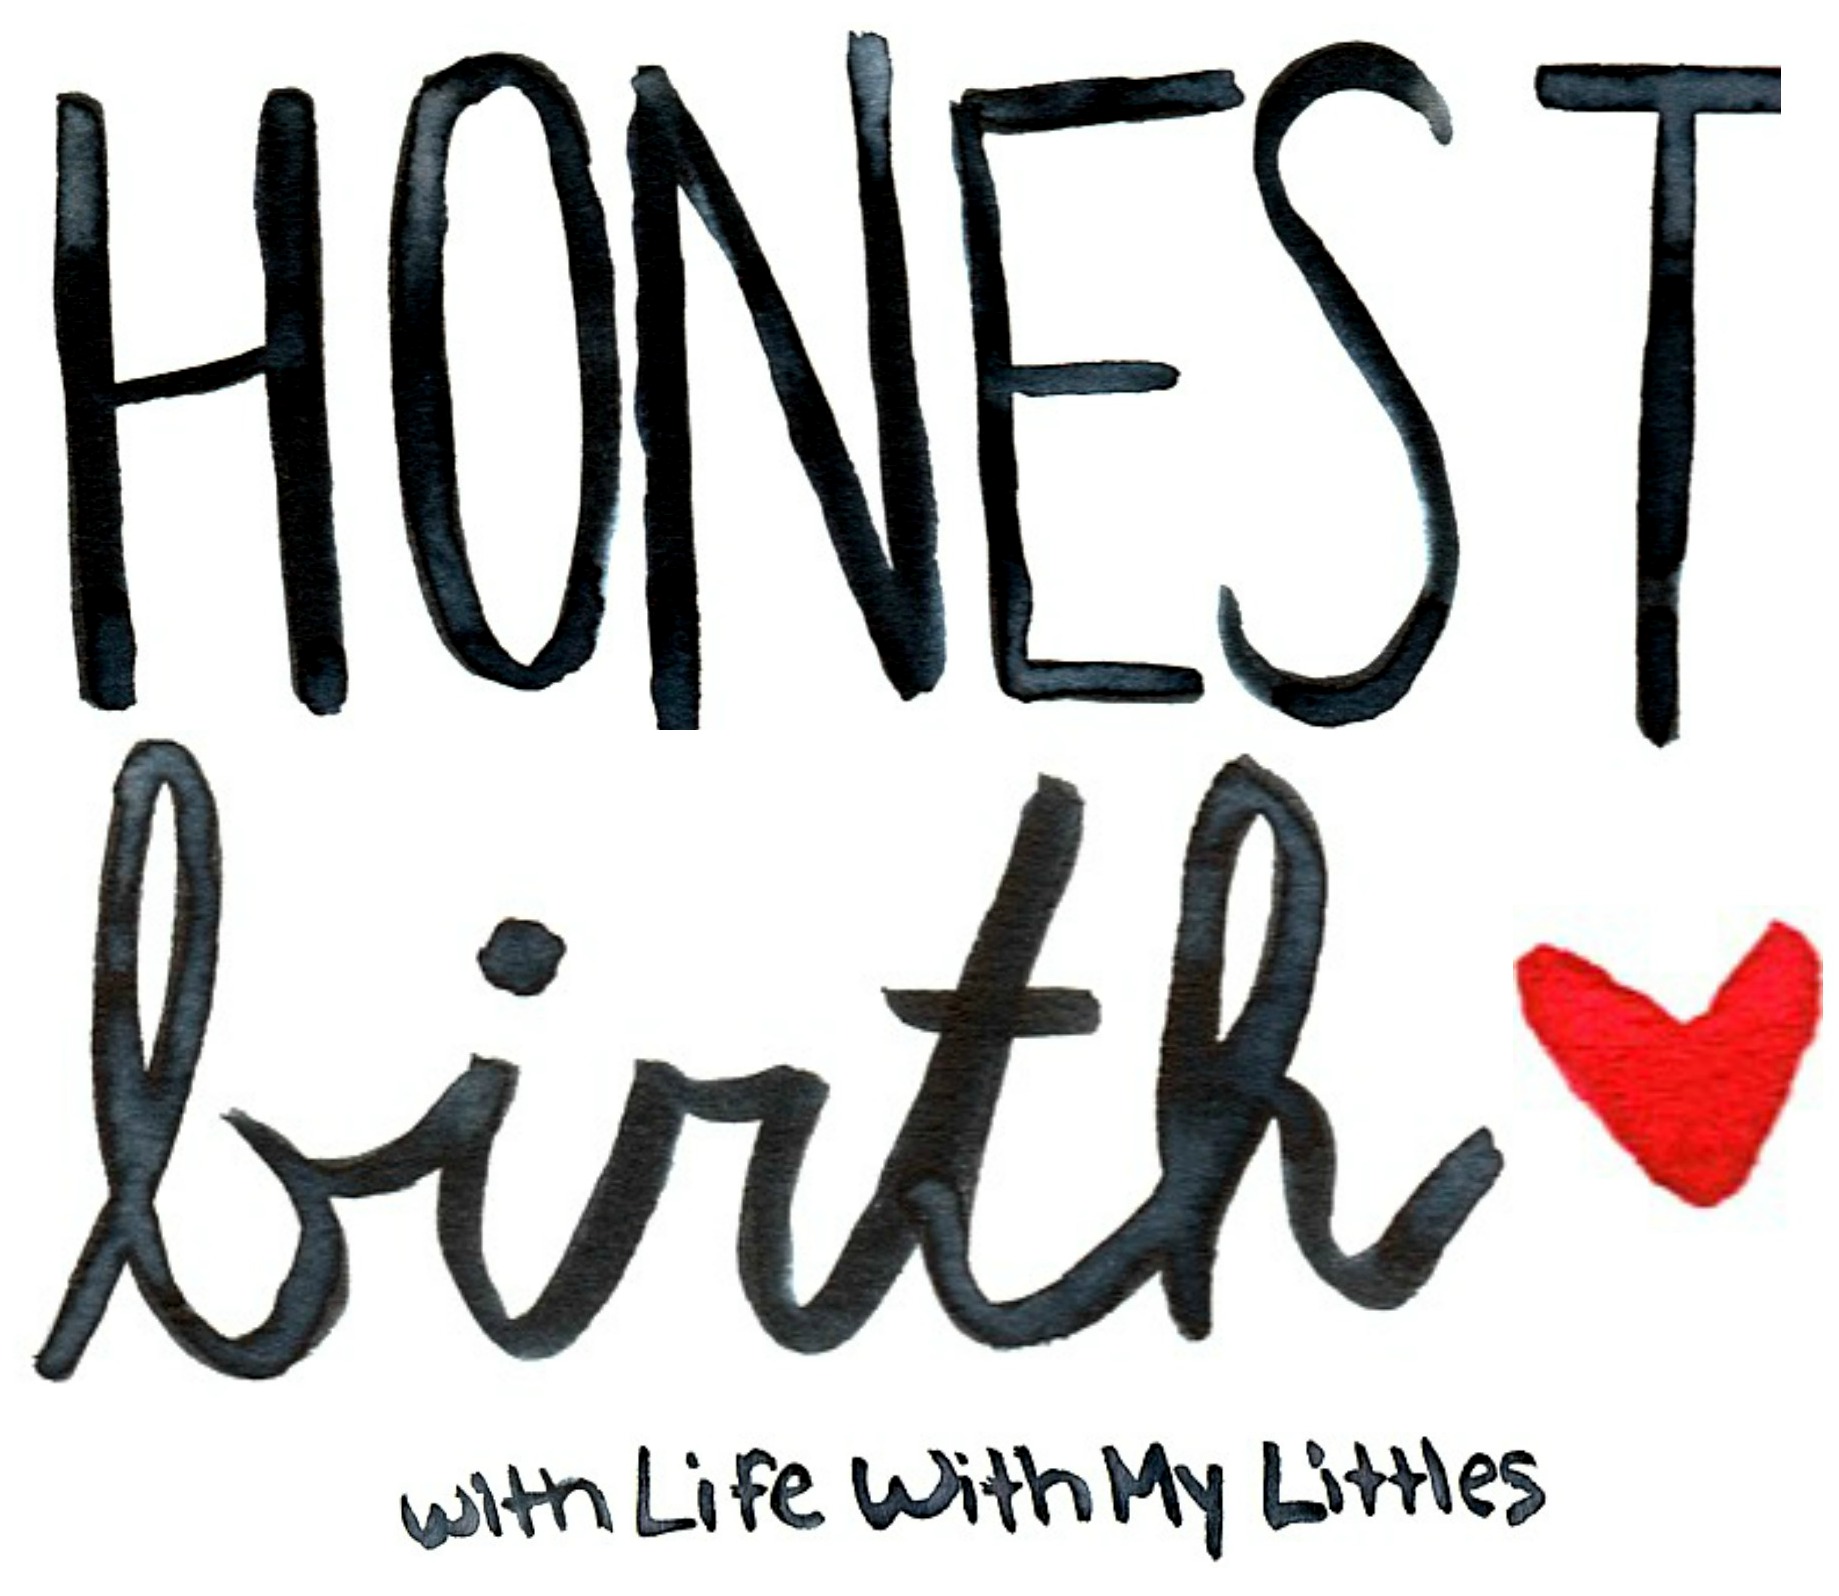 Welcome to Honest Birth, a series where women share their birth stories without holding anything back. Perfect for pregnant mamas to read in preparation for their own childbirth experiences. Every mama is different and every birth is different, and when we share our stories we help each other!